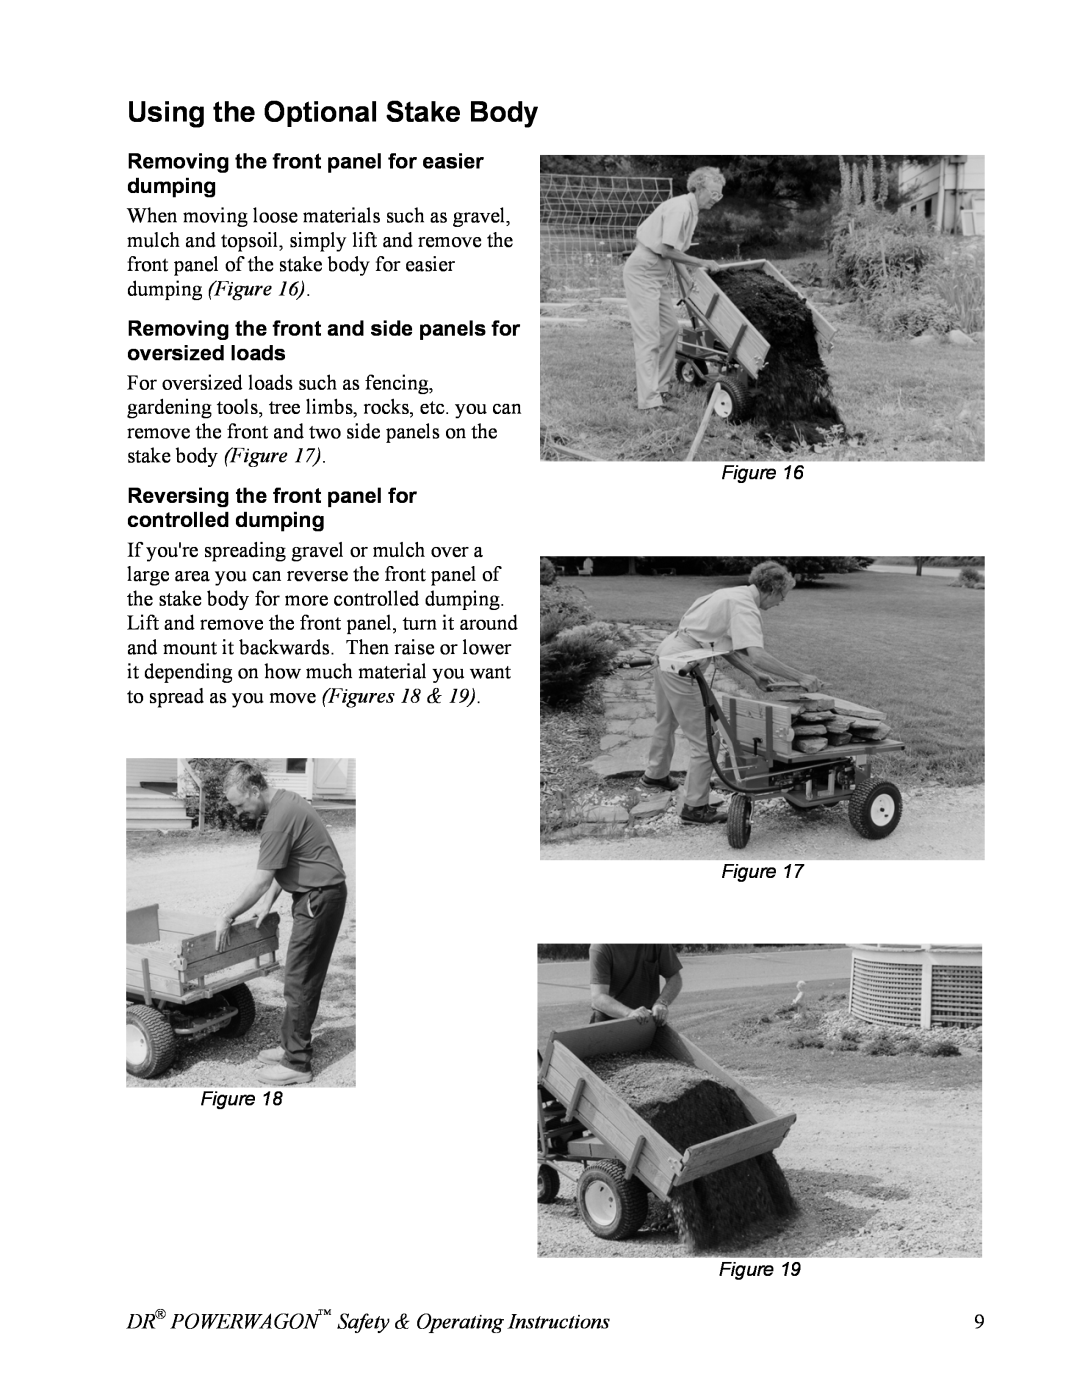 Country Home Products SUBURBANTM owner manual Using the Optional Stake Body, Removing the front panel for easier dumping 